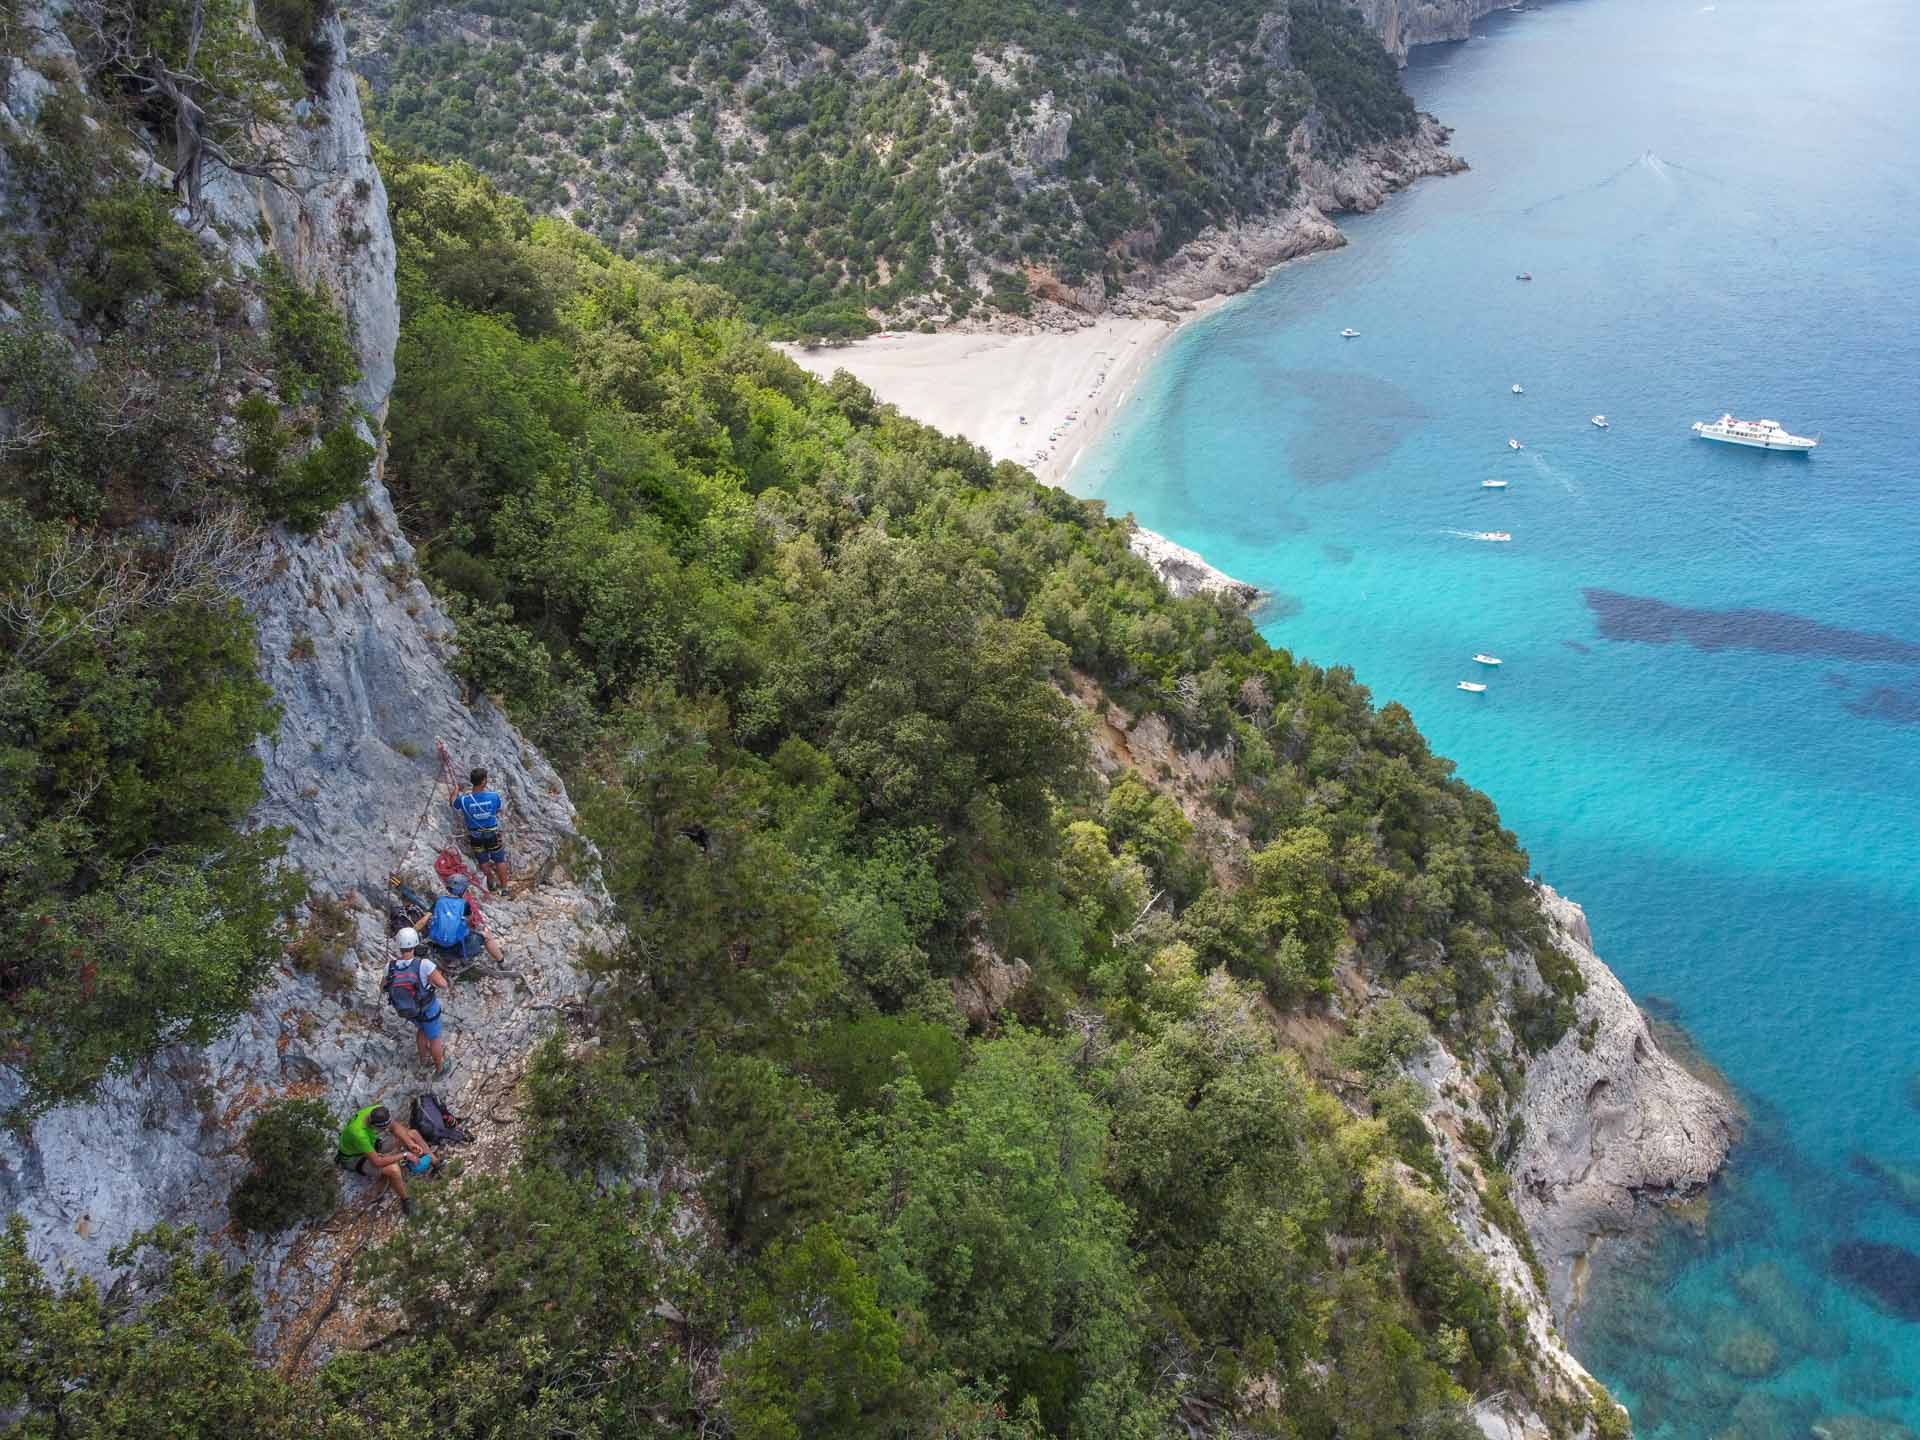 Hikers hug the cliff as they navigate the Selvaggio Blu trail, Italy.